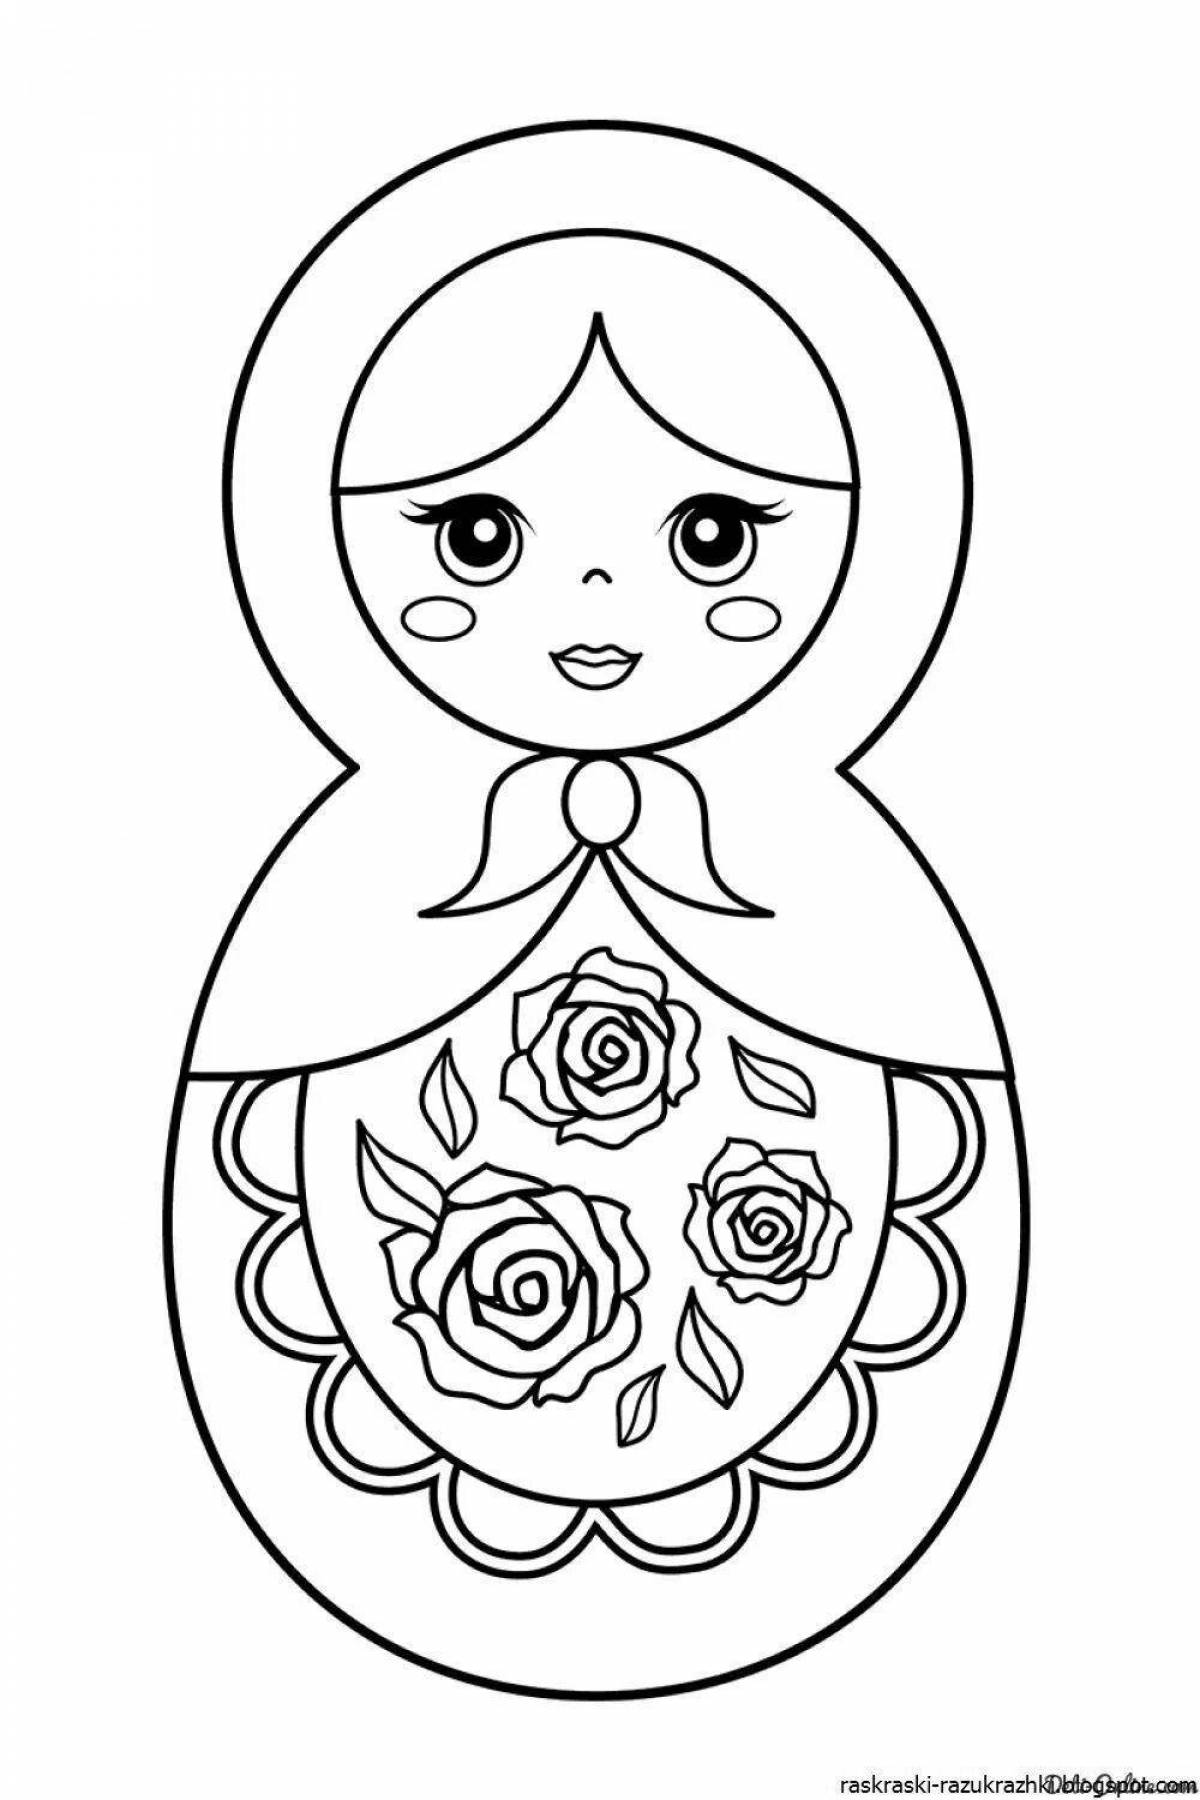 Strange Russian matryoshka coloring book for 6-7 year olds